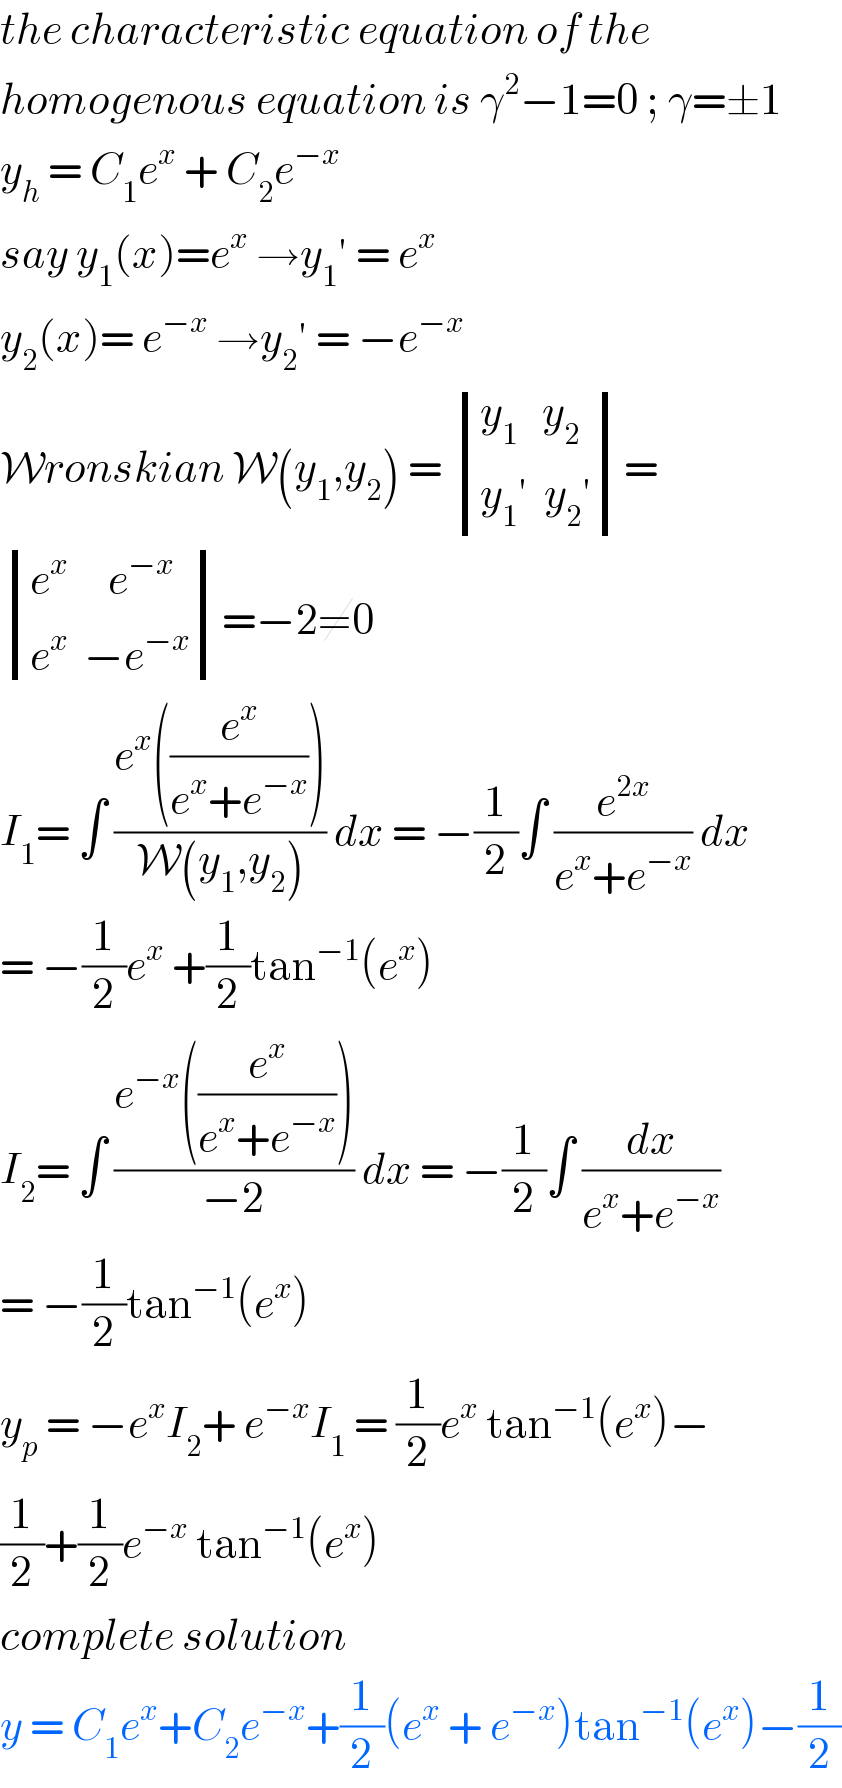 the characteristic equation of the  homogenous equation is γ^2 −1=0 ; γ=±1  y_h  = C_1 e^x  + C_2 e^(−x)    say y_1 (x)=e^x  →y_1 ′ = e^x   y_2 (x)= e^(−x)  →y_2 ′ = −e^(−x)   Wronskian W(y_1 ,y_2 ) =  determinant (((y_1    y_2 )),((y_1 ′  y_2 ′)))=   determinant (((e^x      e^(−x) )),((e^x   −e^(−x) )))=−2≠0  I_1 = ∫ ((e^x ((e^x /(e^x +e^(−x) ))))/(W(y_1 ,y_2 ))) dx = −(1/2)∫ (e^(2x) /(e^x +e^(−x) )) dx   = −(1/2)e^x  +(1/2)tan^(−1) (e^x )  I_2 = ∫ ((e^(−x) ((e^x /(e^x +e^(−x) ))))/(−2)) dx = −(1/2)∫ (dx/(e^x +e^(−x) ))  = −(1/2)tan^(−1) (e^x )   y_p  = −e^x I_2 + e^(−x) I_1  = (1/2)e^x  tan^(−1) (e^x )−  (1/2)+(1/2)e^(−x)  tan^(−1) (e^x )   complete solution   y = C_1 e^x +C_2 e^(−x) +(1/2)(e^x  + e^(−x) )tan^(−1) (e^x )−(1/2)  